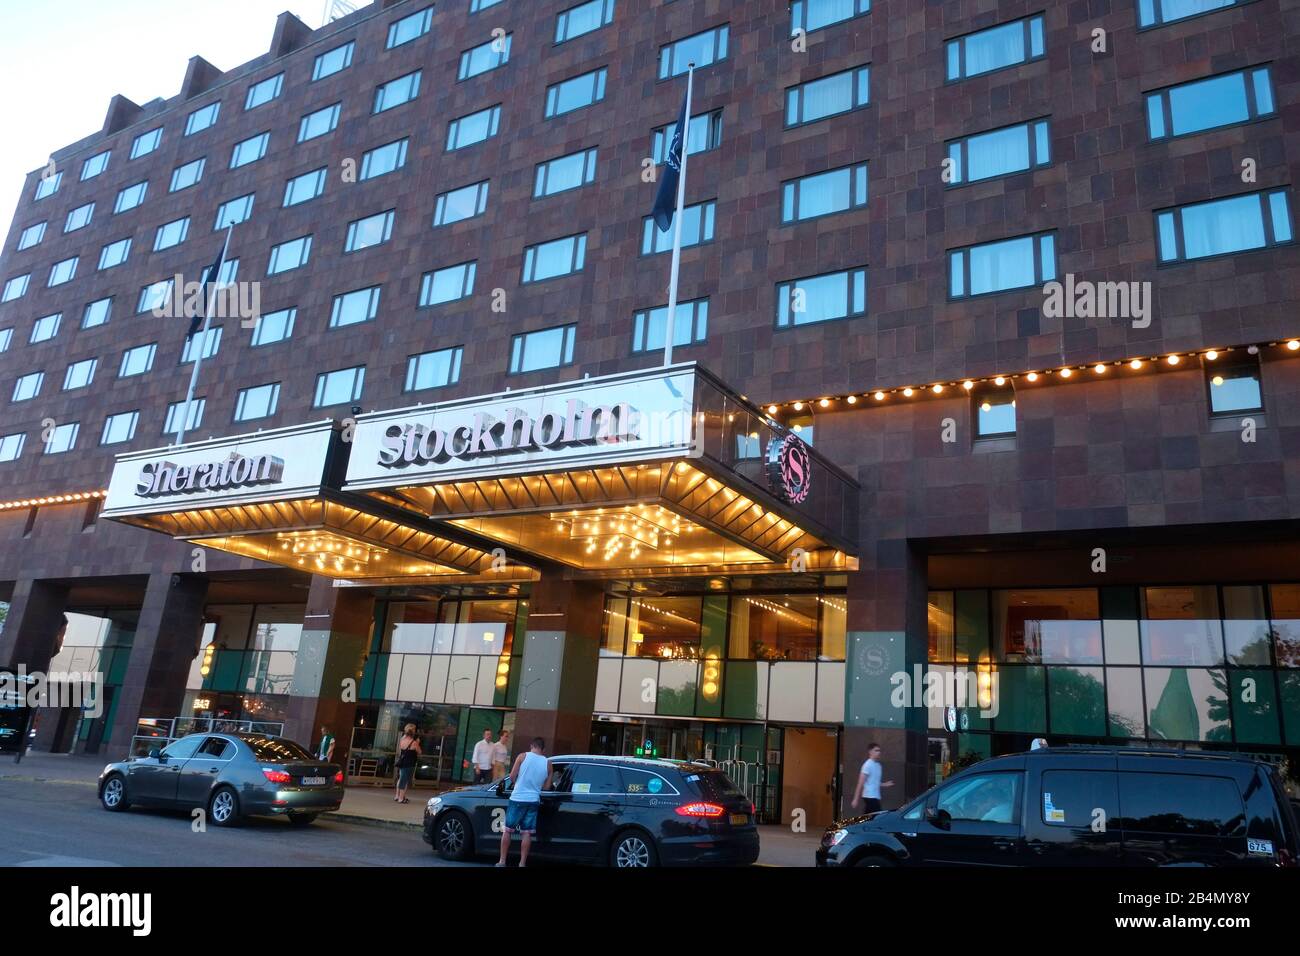 The Sheraton Stockholm Hotel is a five-star hotel on the corner of Vasagatan and Tegelbacken in central Stockholm Stock Photo